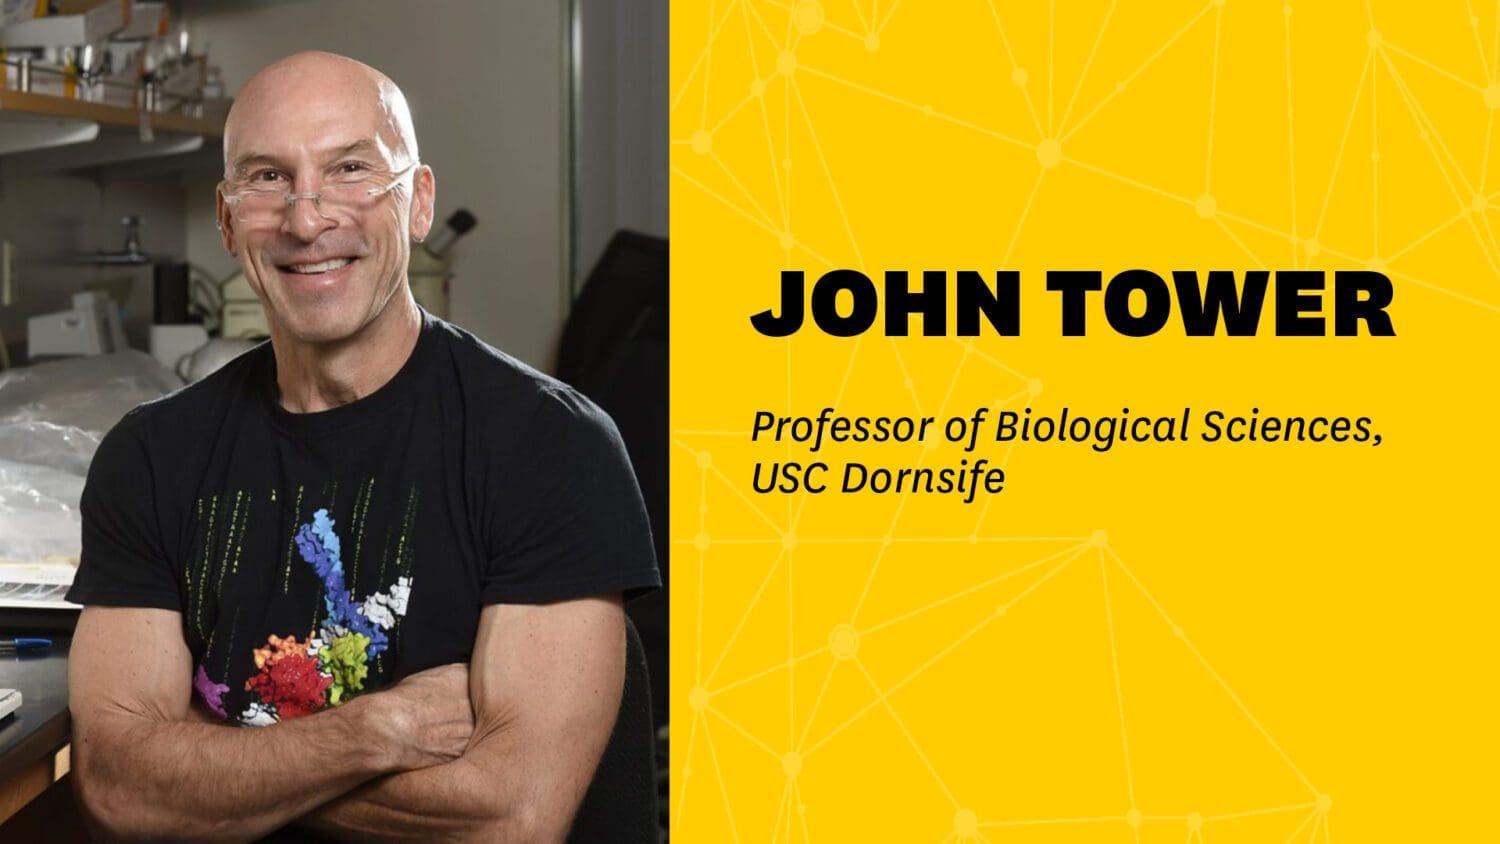 Headshot of John Tower with name and faculty title